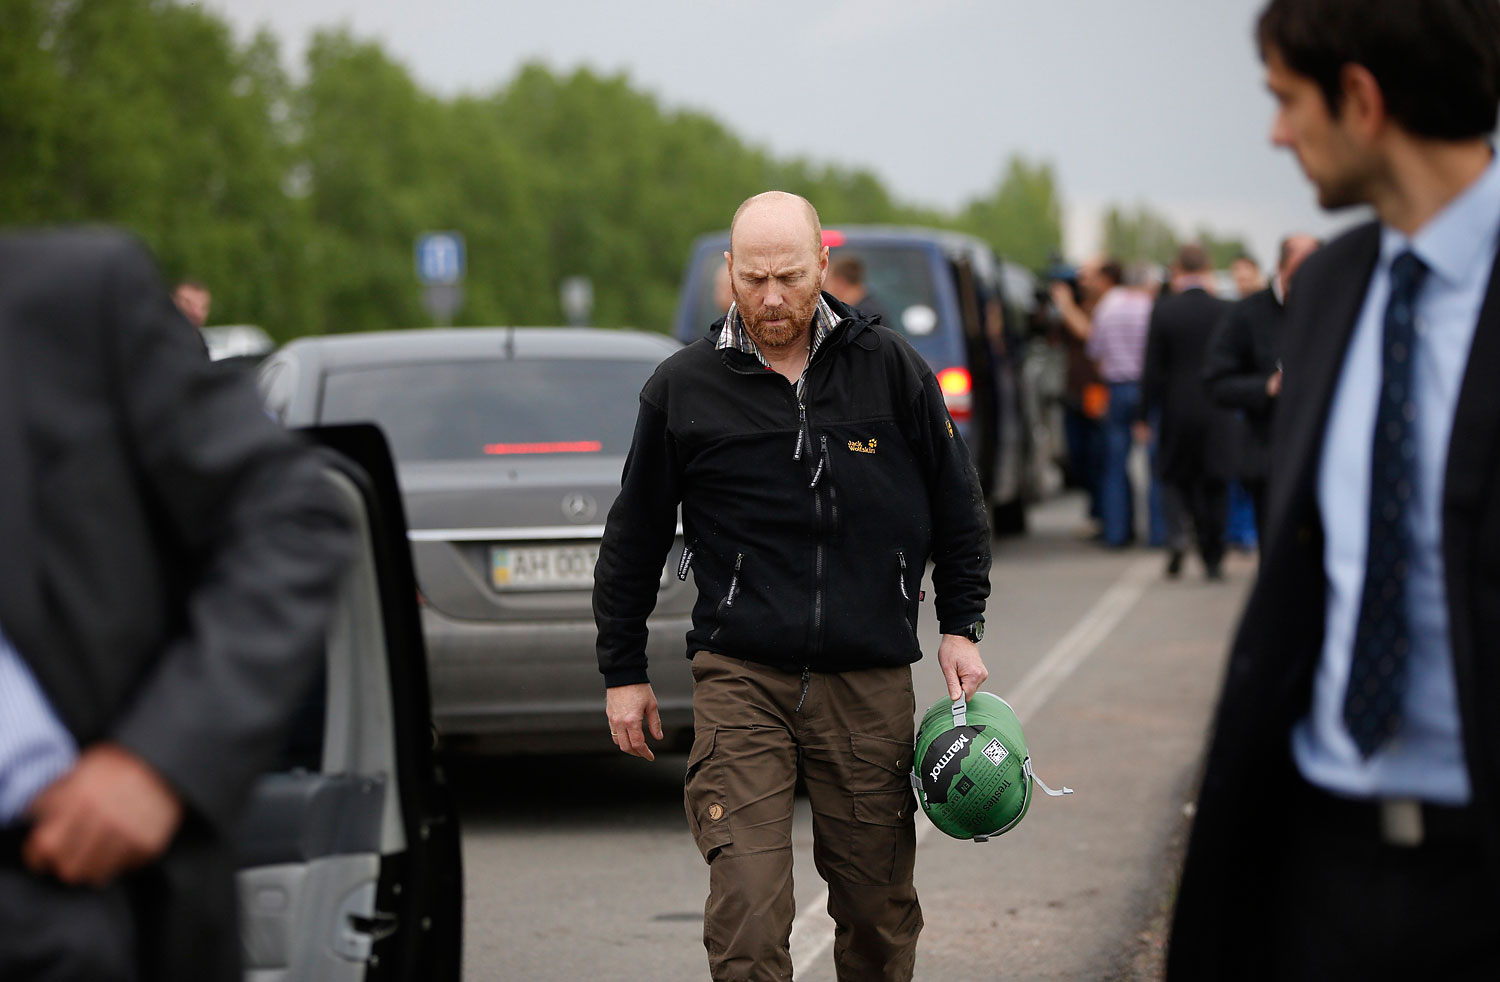 OSCE observer Axel Schneider walks among colleagues on a road 30 km from Donetsk in eastern Ukraine May 3, 2014, after being freed by pro-Russian separatists. (Marko Djurica—Reuters)